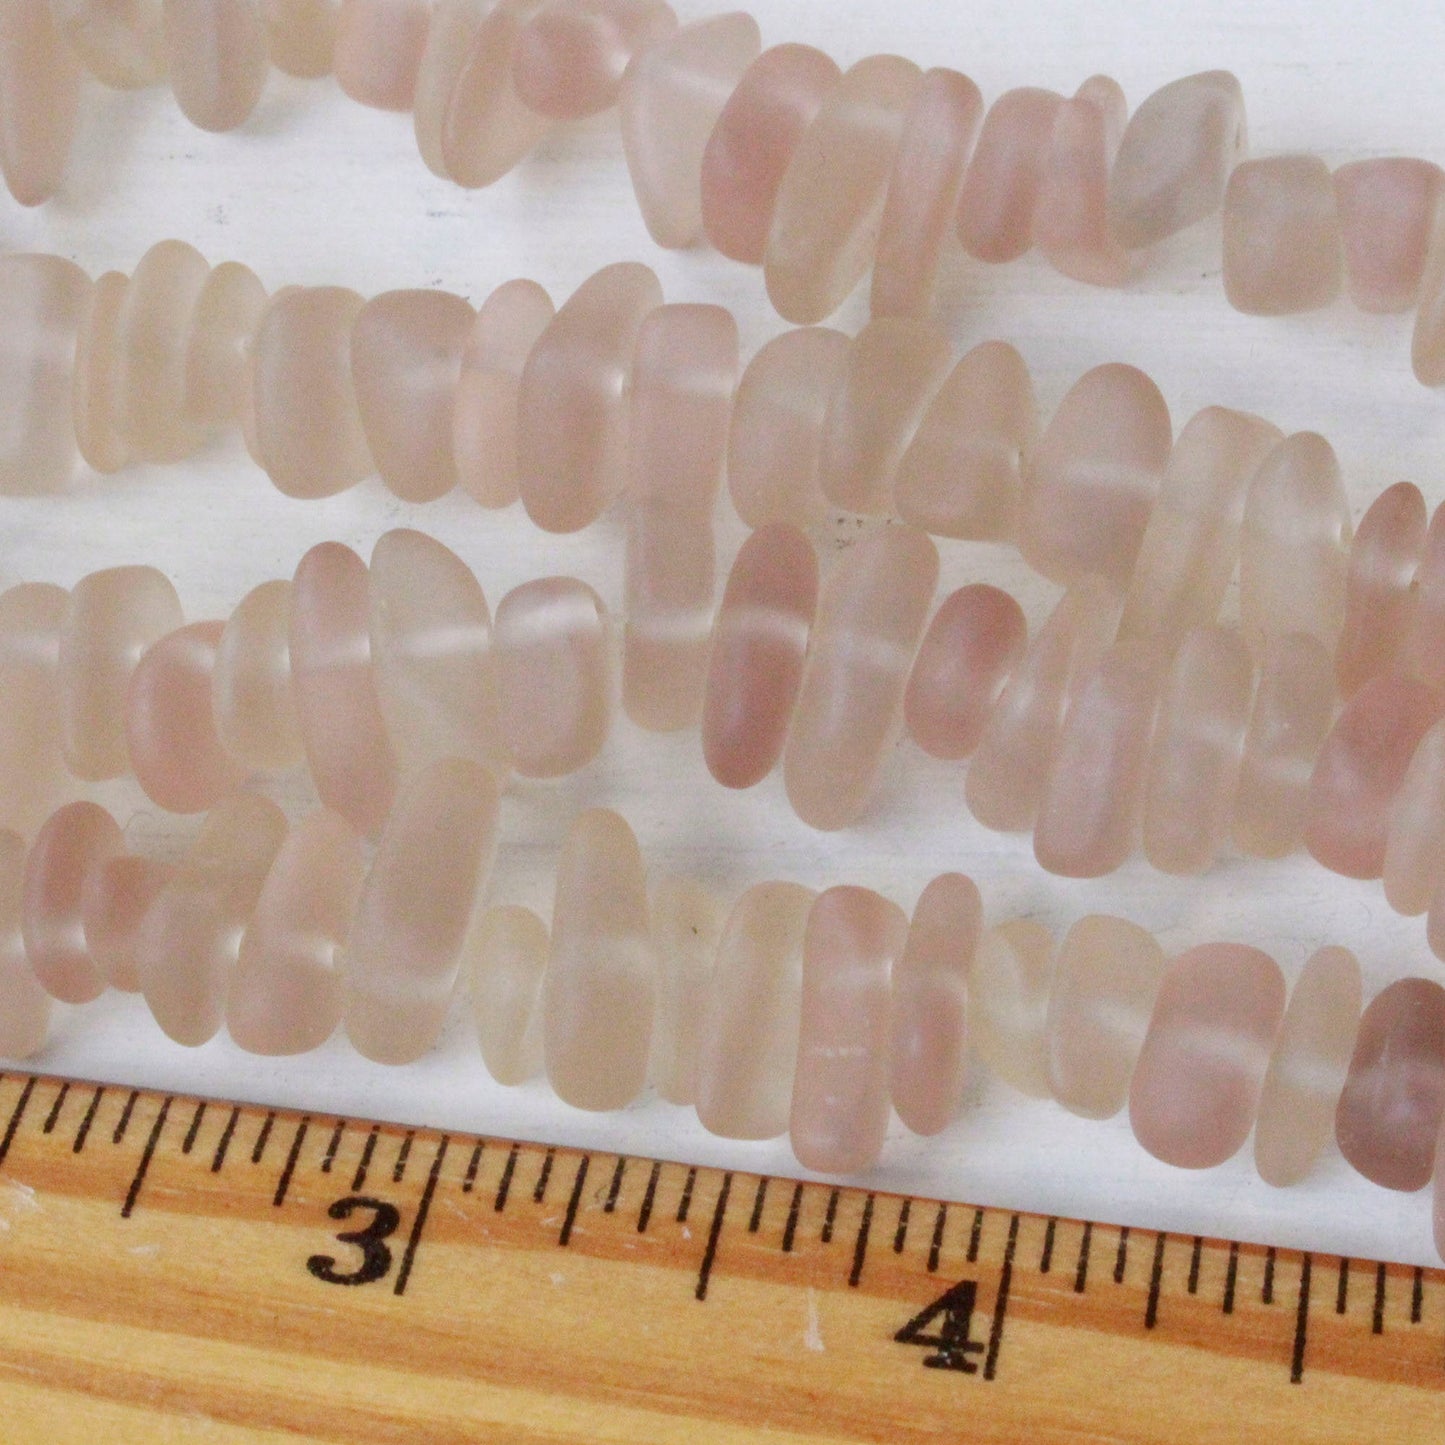 Frosted Glass Pebbles - Lt Peach - 50 Beads